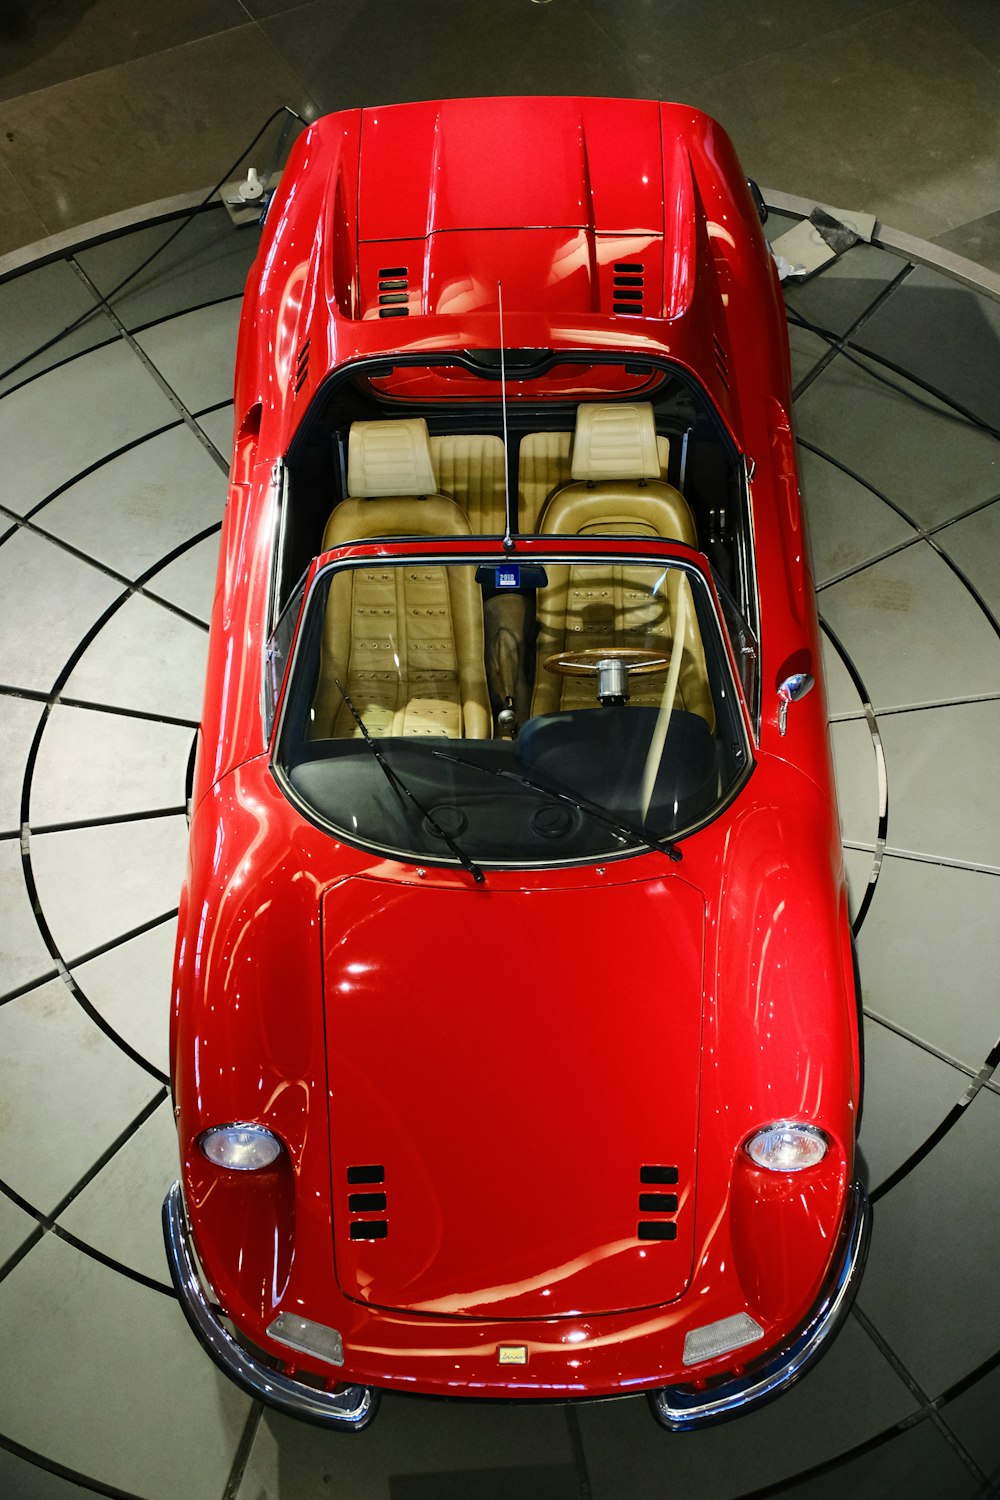 an overhead view of a red sports car